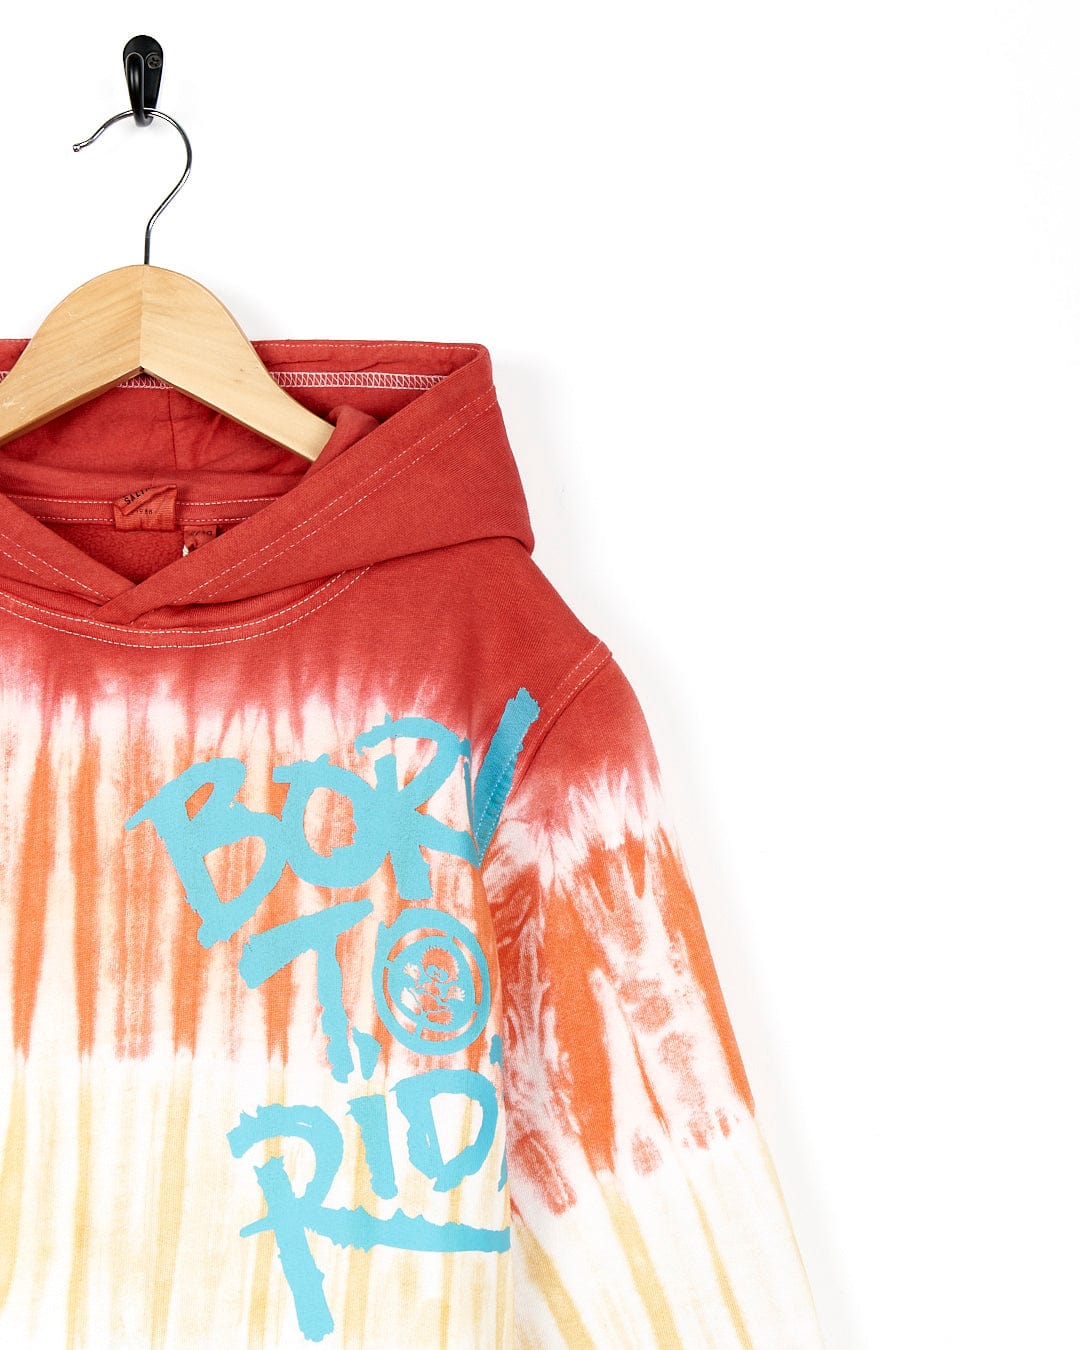 A Born To Ride - Kids Tie Dye Pop Hoodie - Red by Saltrock with the word boy to ride on it.